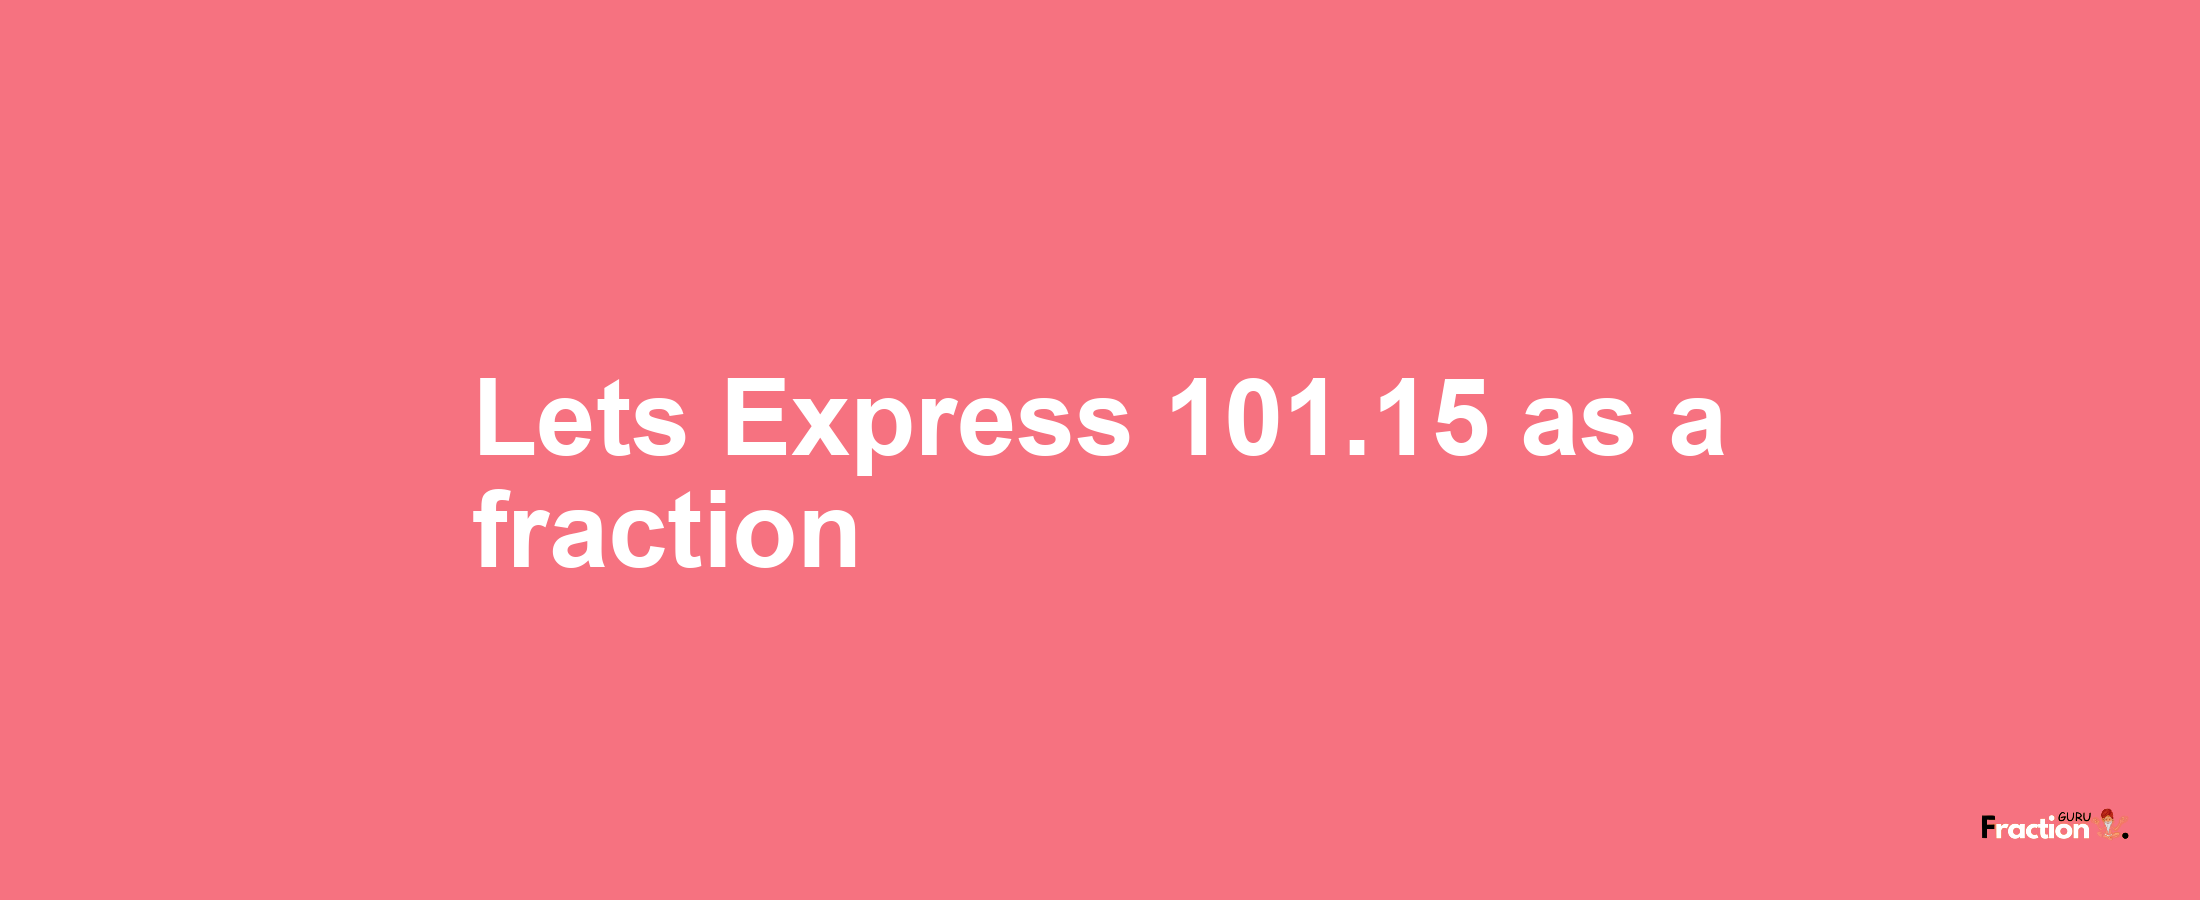 Lets Express 101.15 as afraction